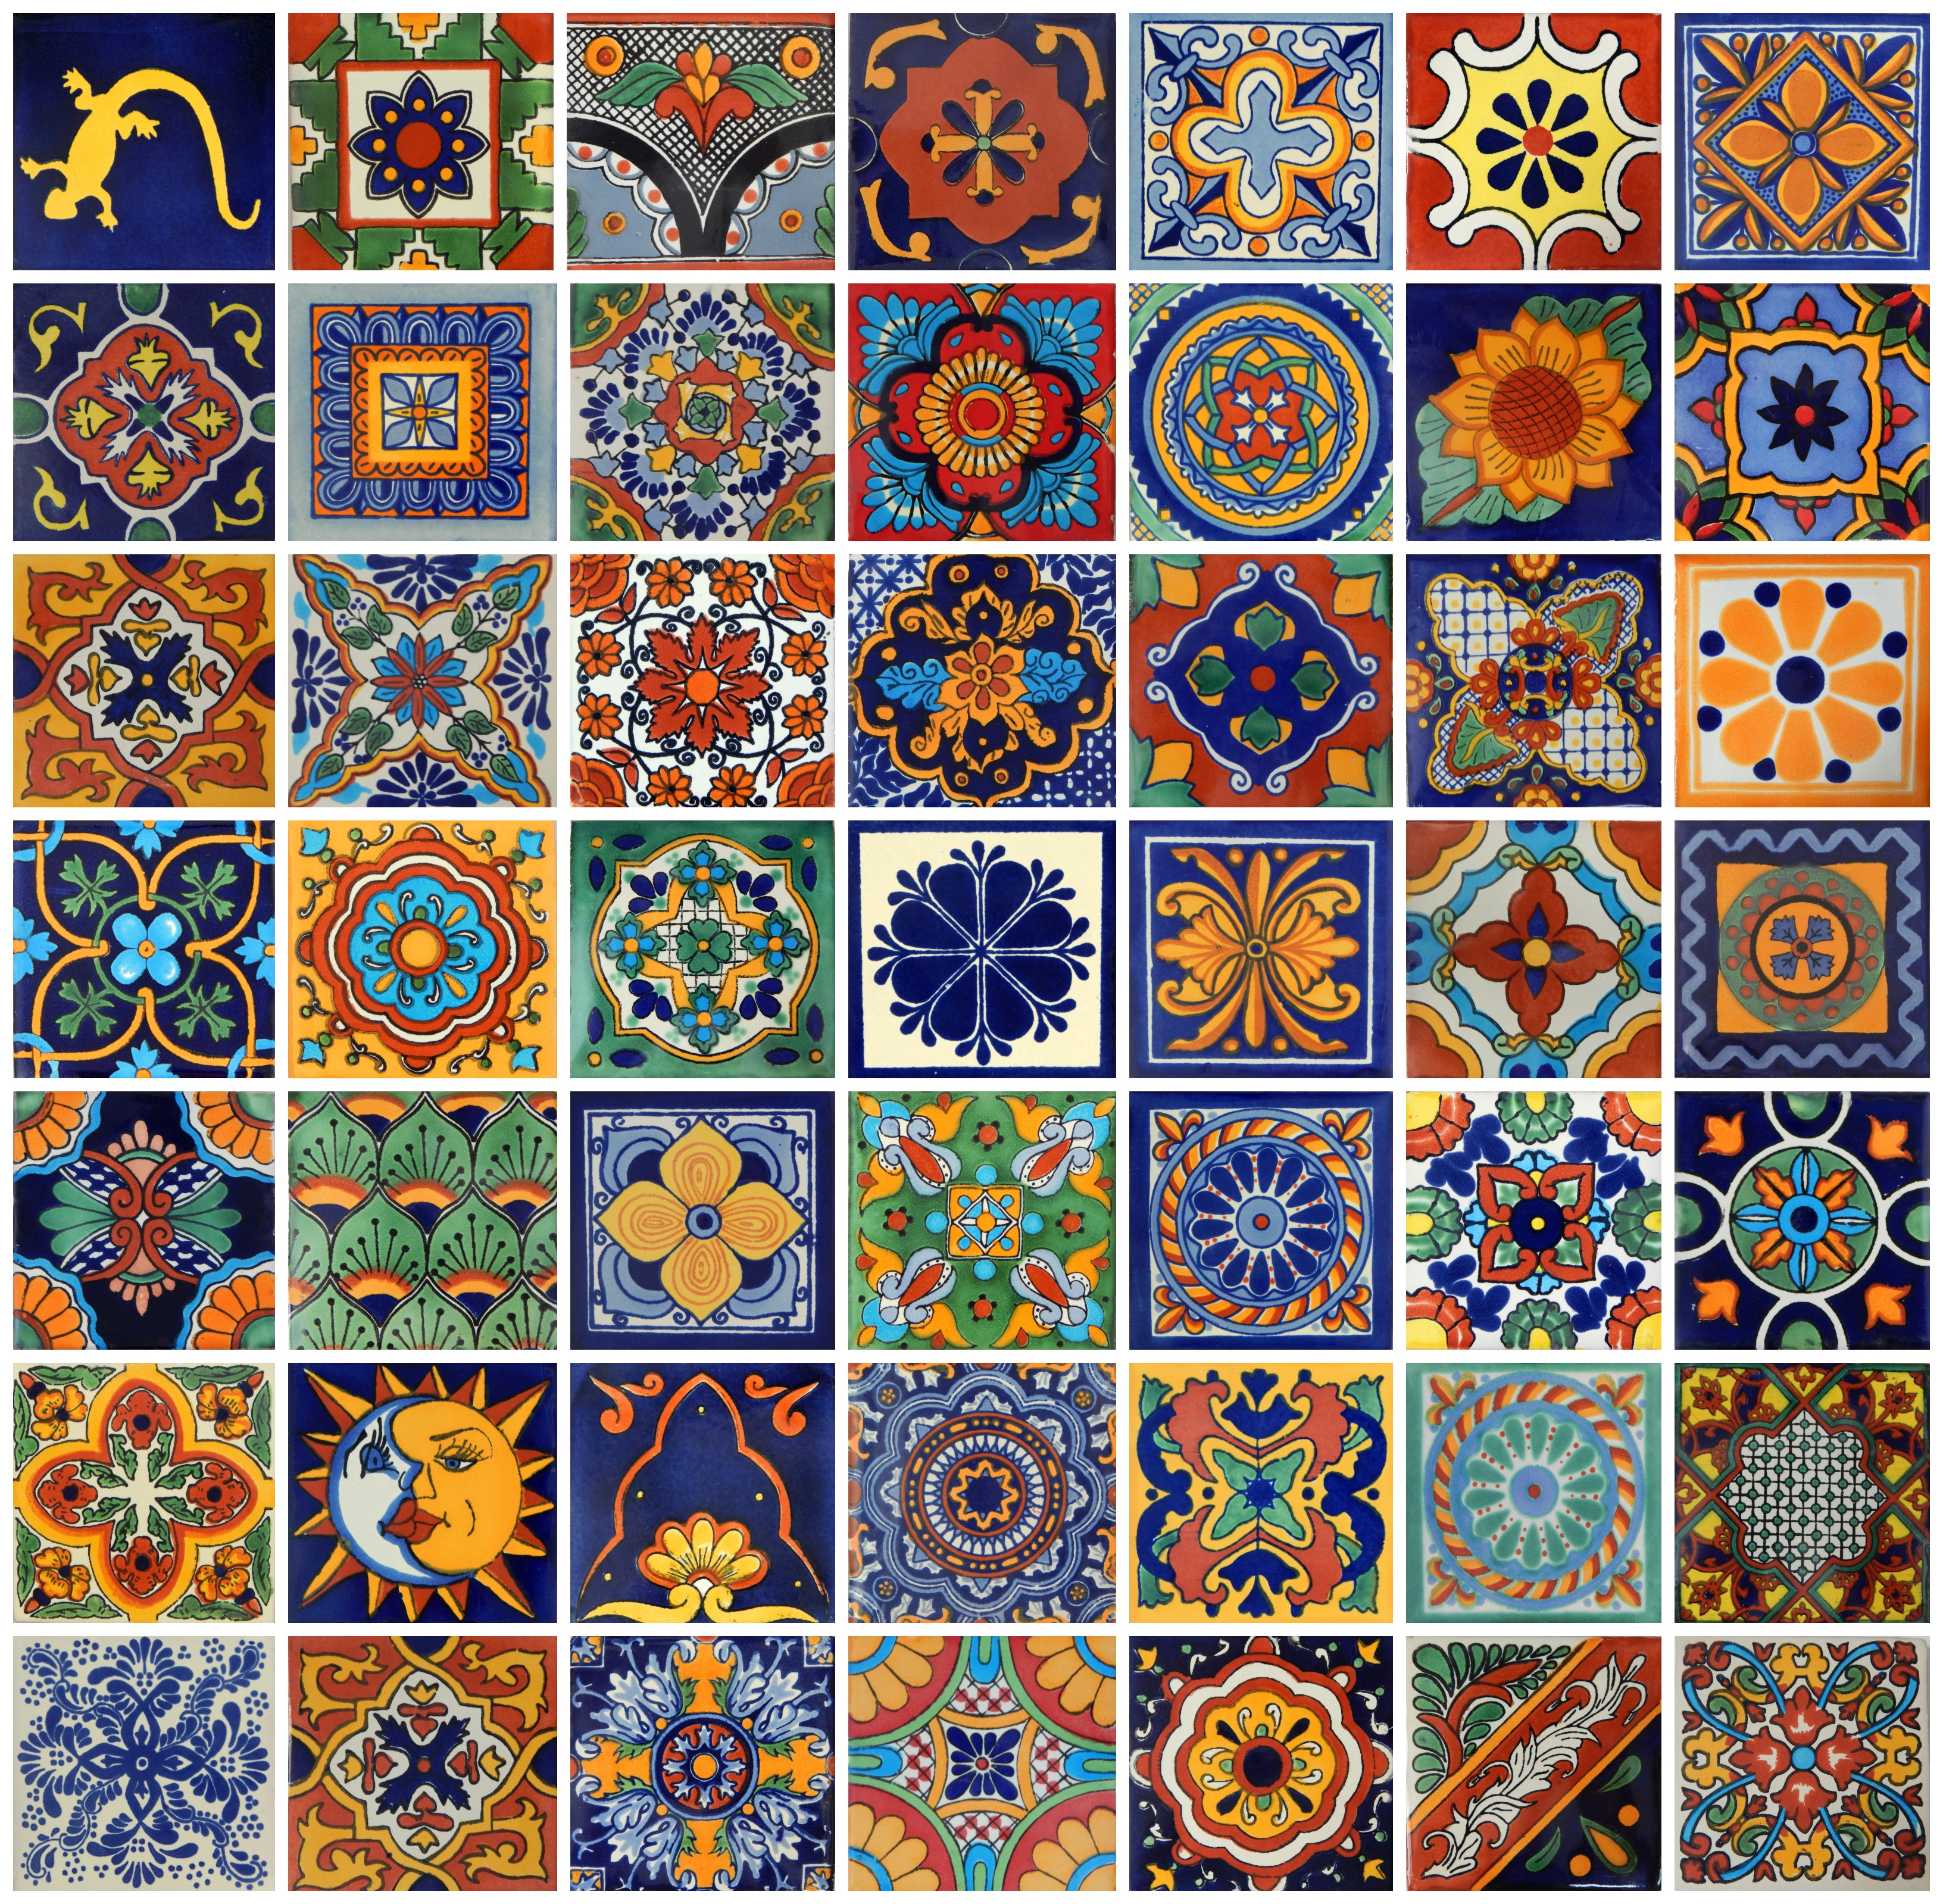 100 Mexican Tiles 4x4 Handpainted Hundred Pieces 50 Different Designs - image 1 of 1